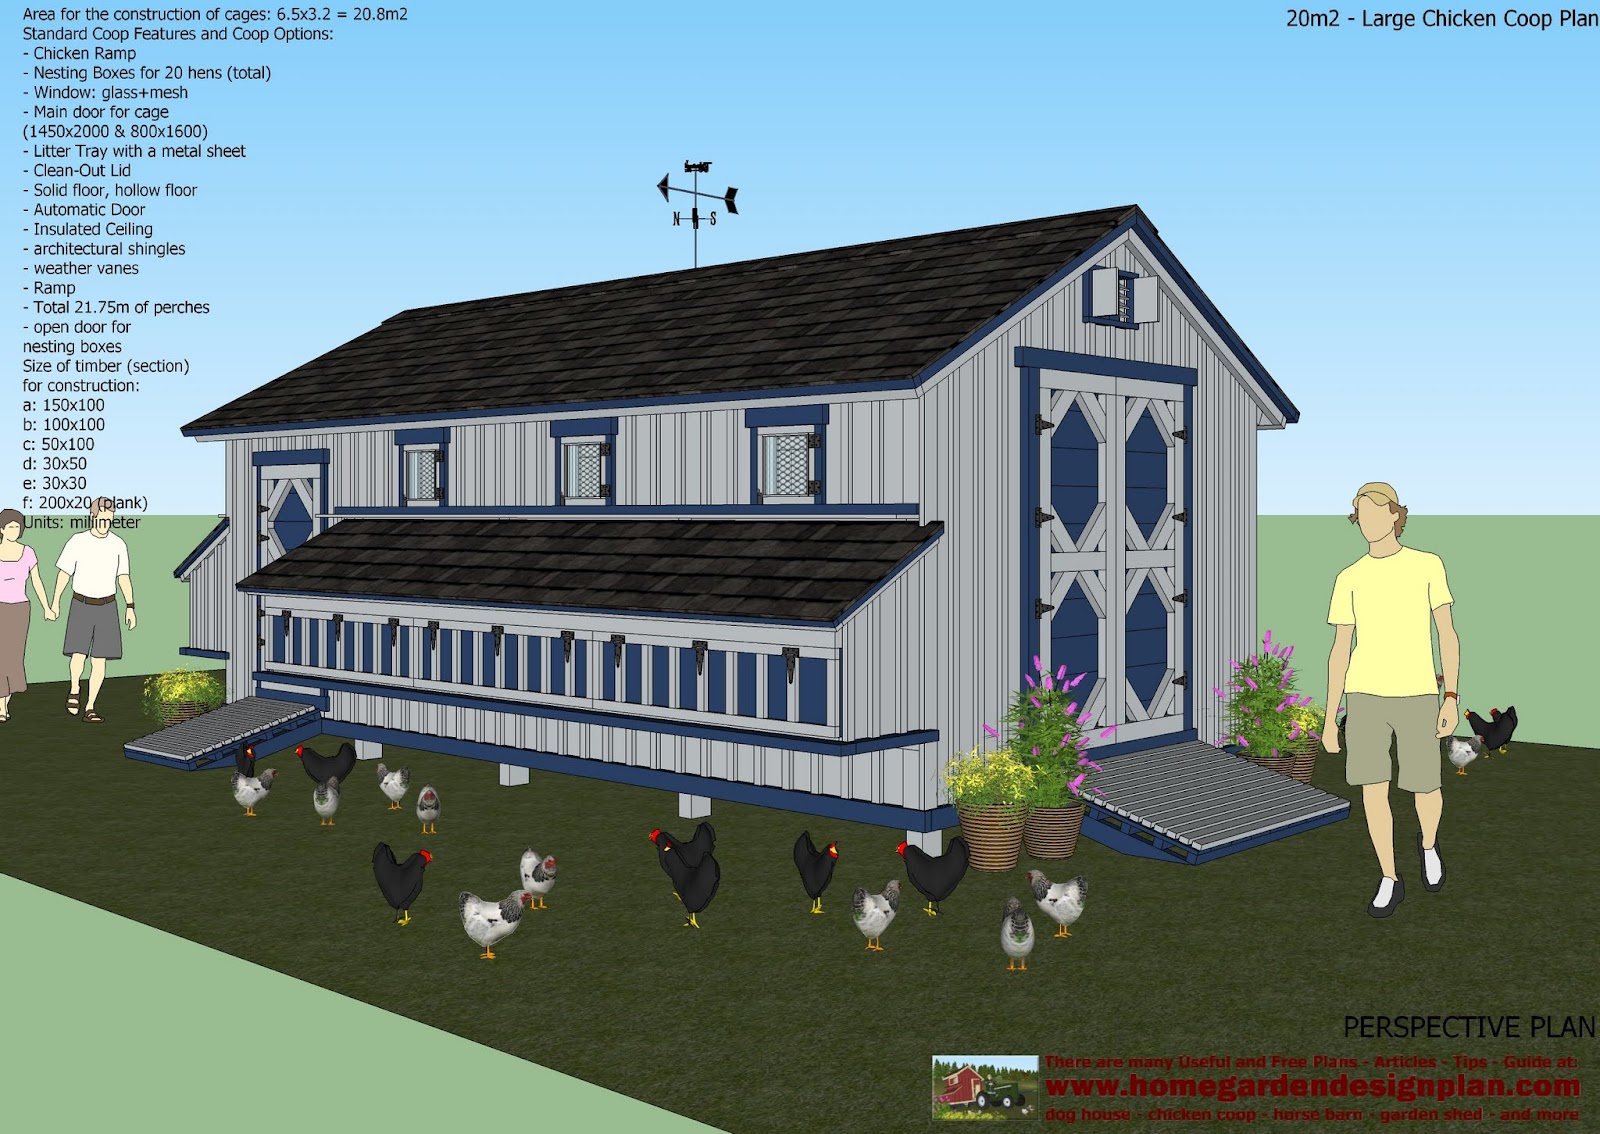 L310 - Large chicken coop plans - Chicken coop design - How to build a 